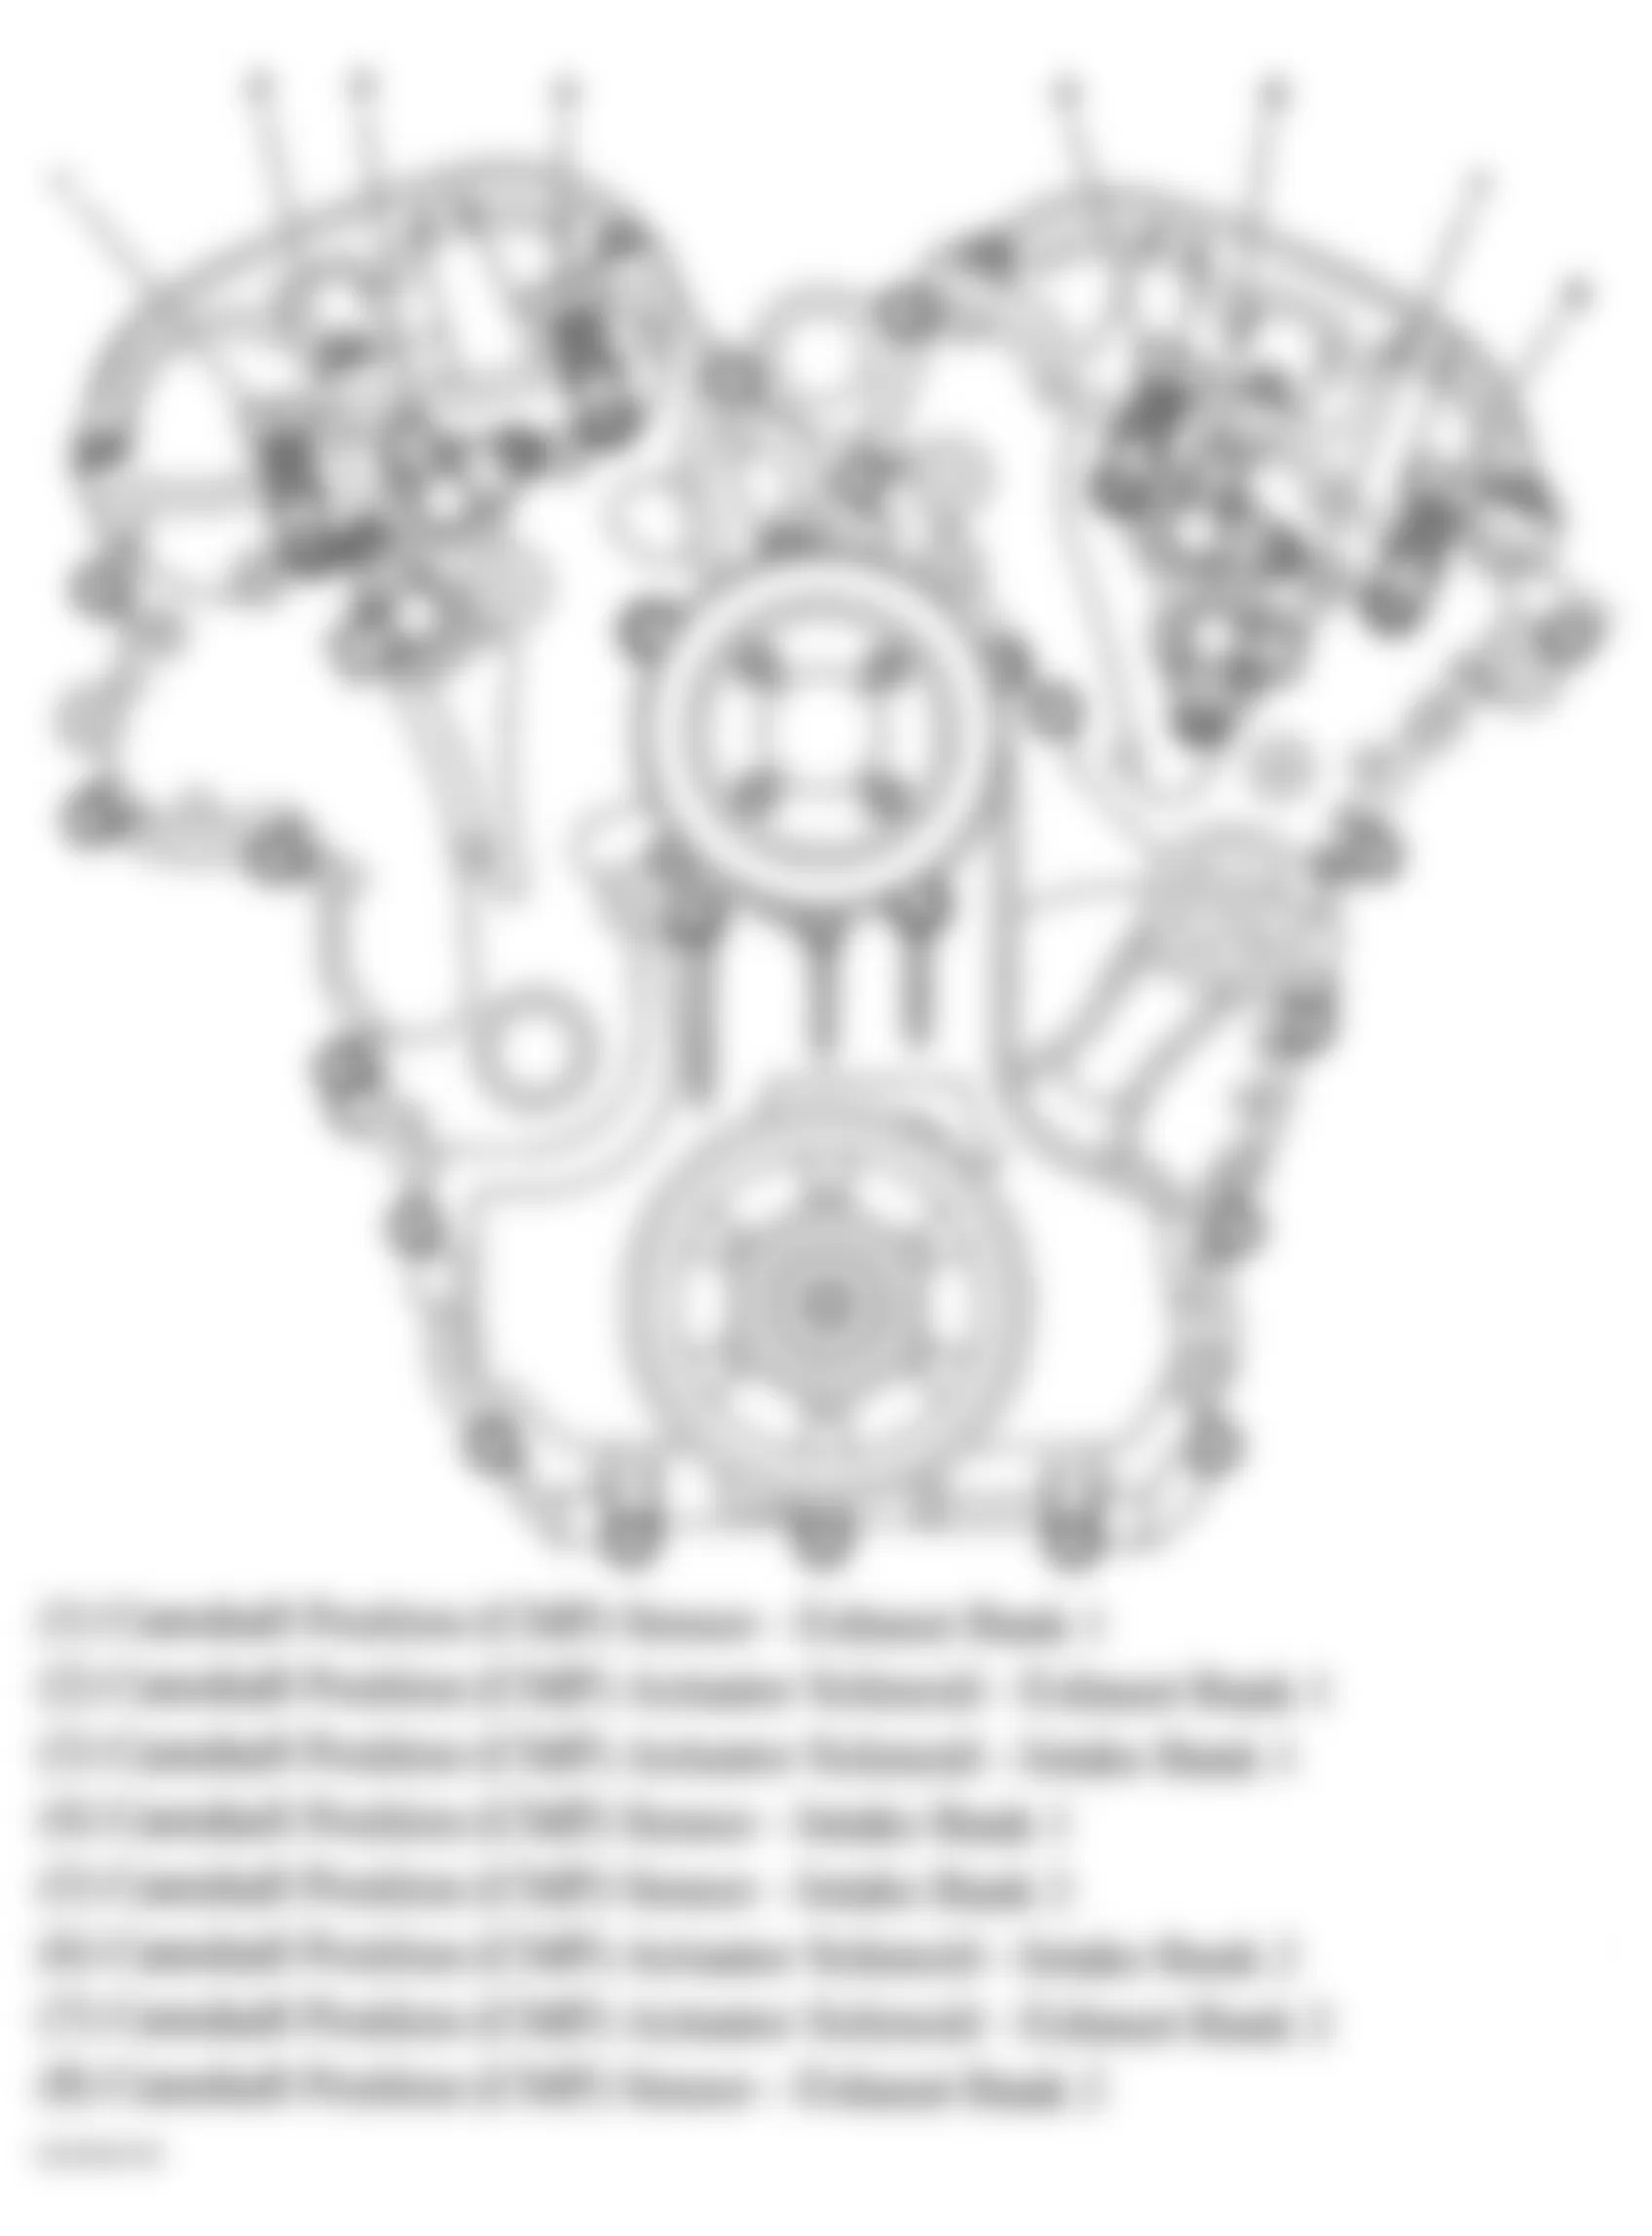 Buick LaCrosse CXL 2006 - Component Locations -  Front Of Engine (3.6L)